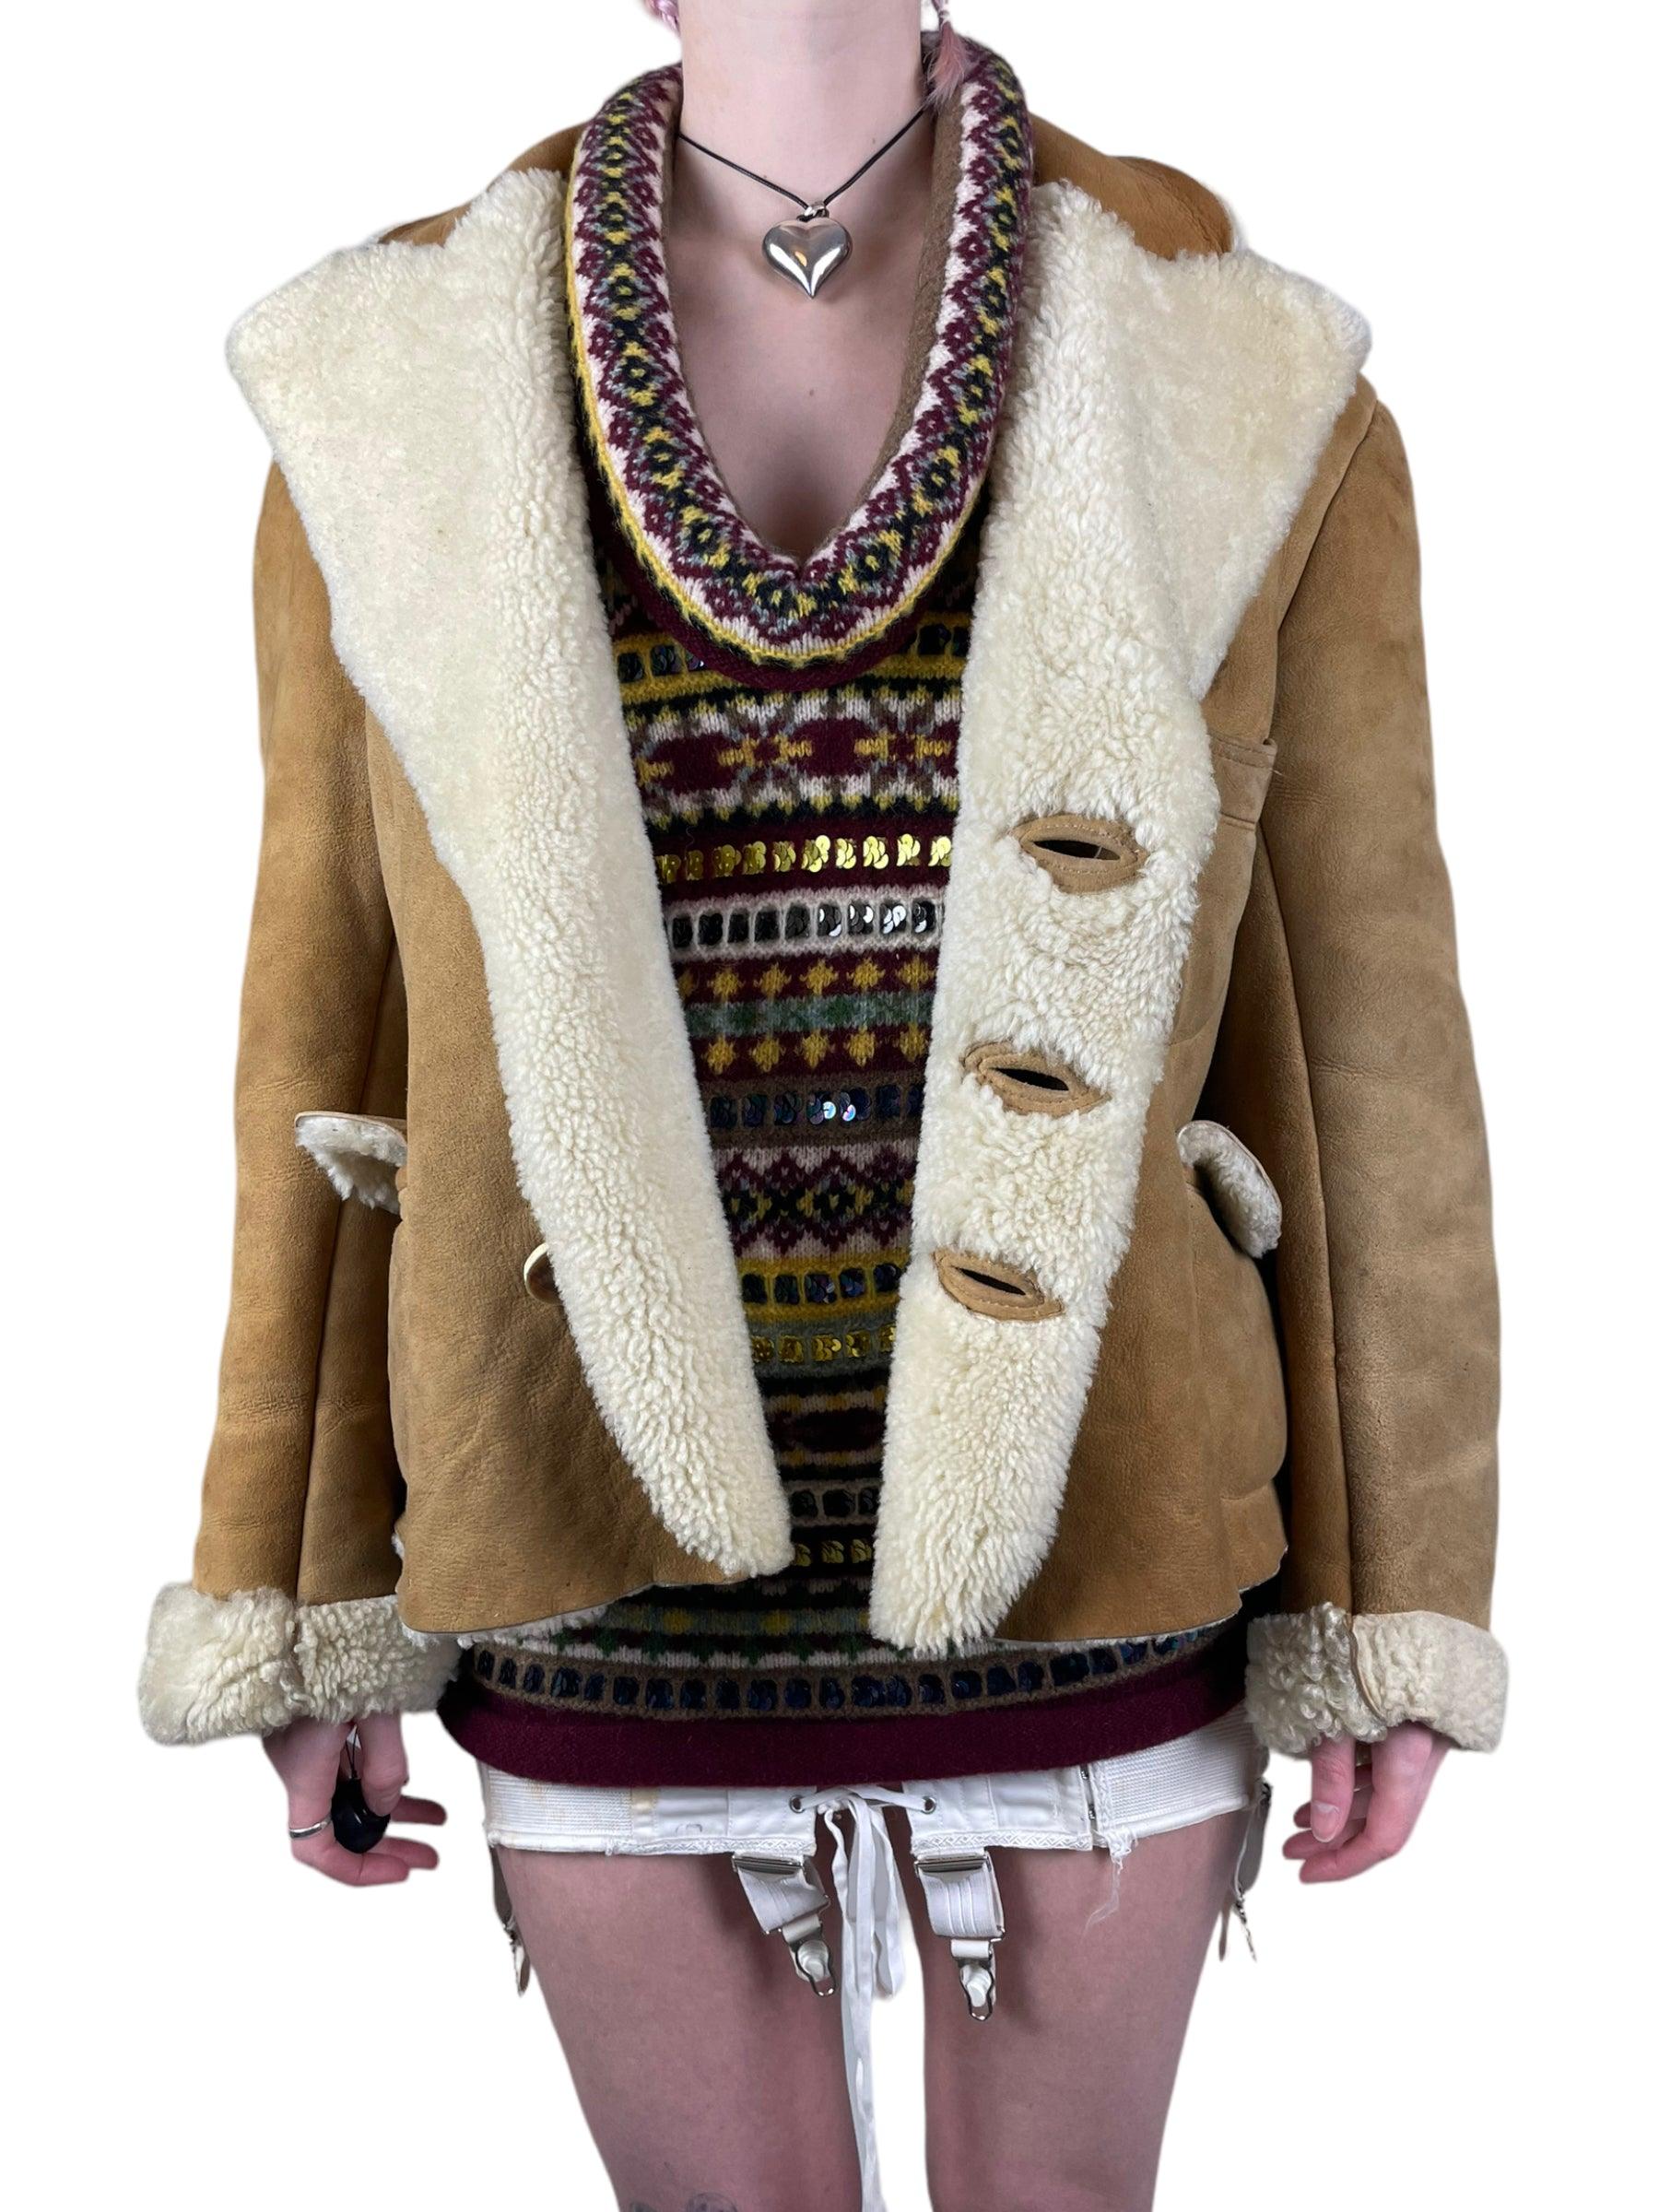 Vivienne Westwood AW1988 reissue of AW1982 Nostalgia of Mud shearling jacket - Known Source